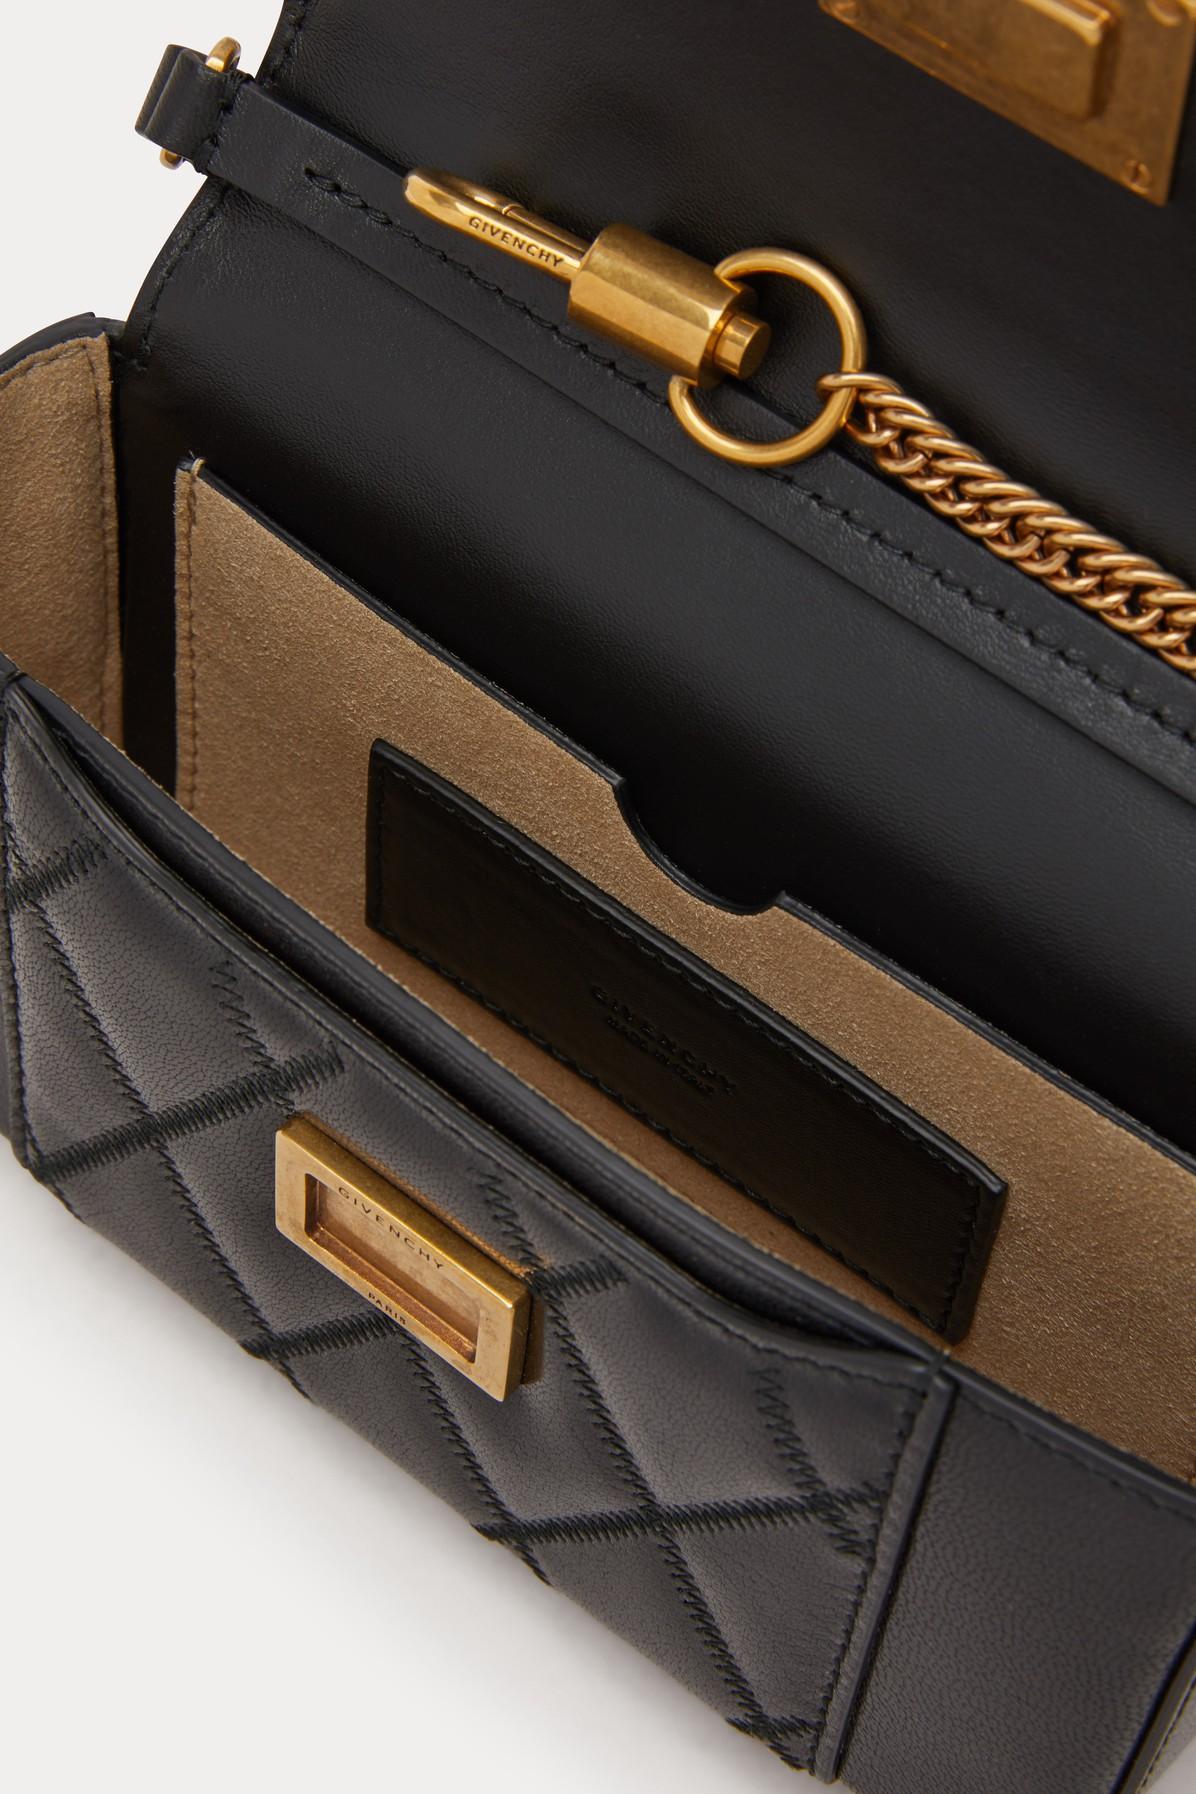 Givenchy Mini Pocket Bag In Diamond Quilted Leather in Black - Lyst